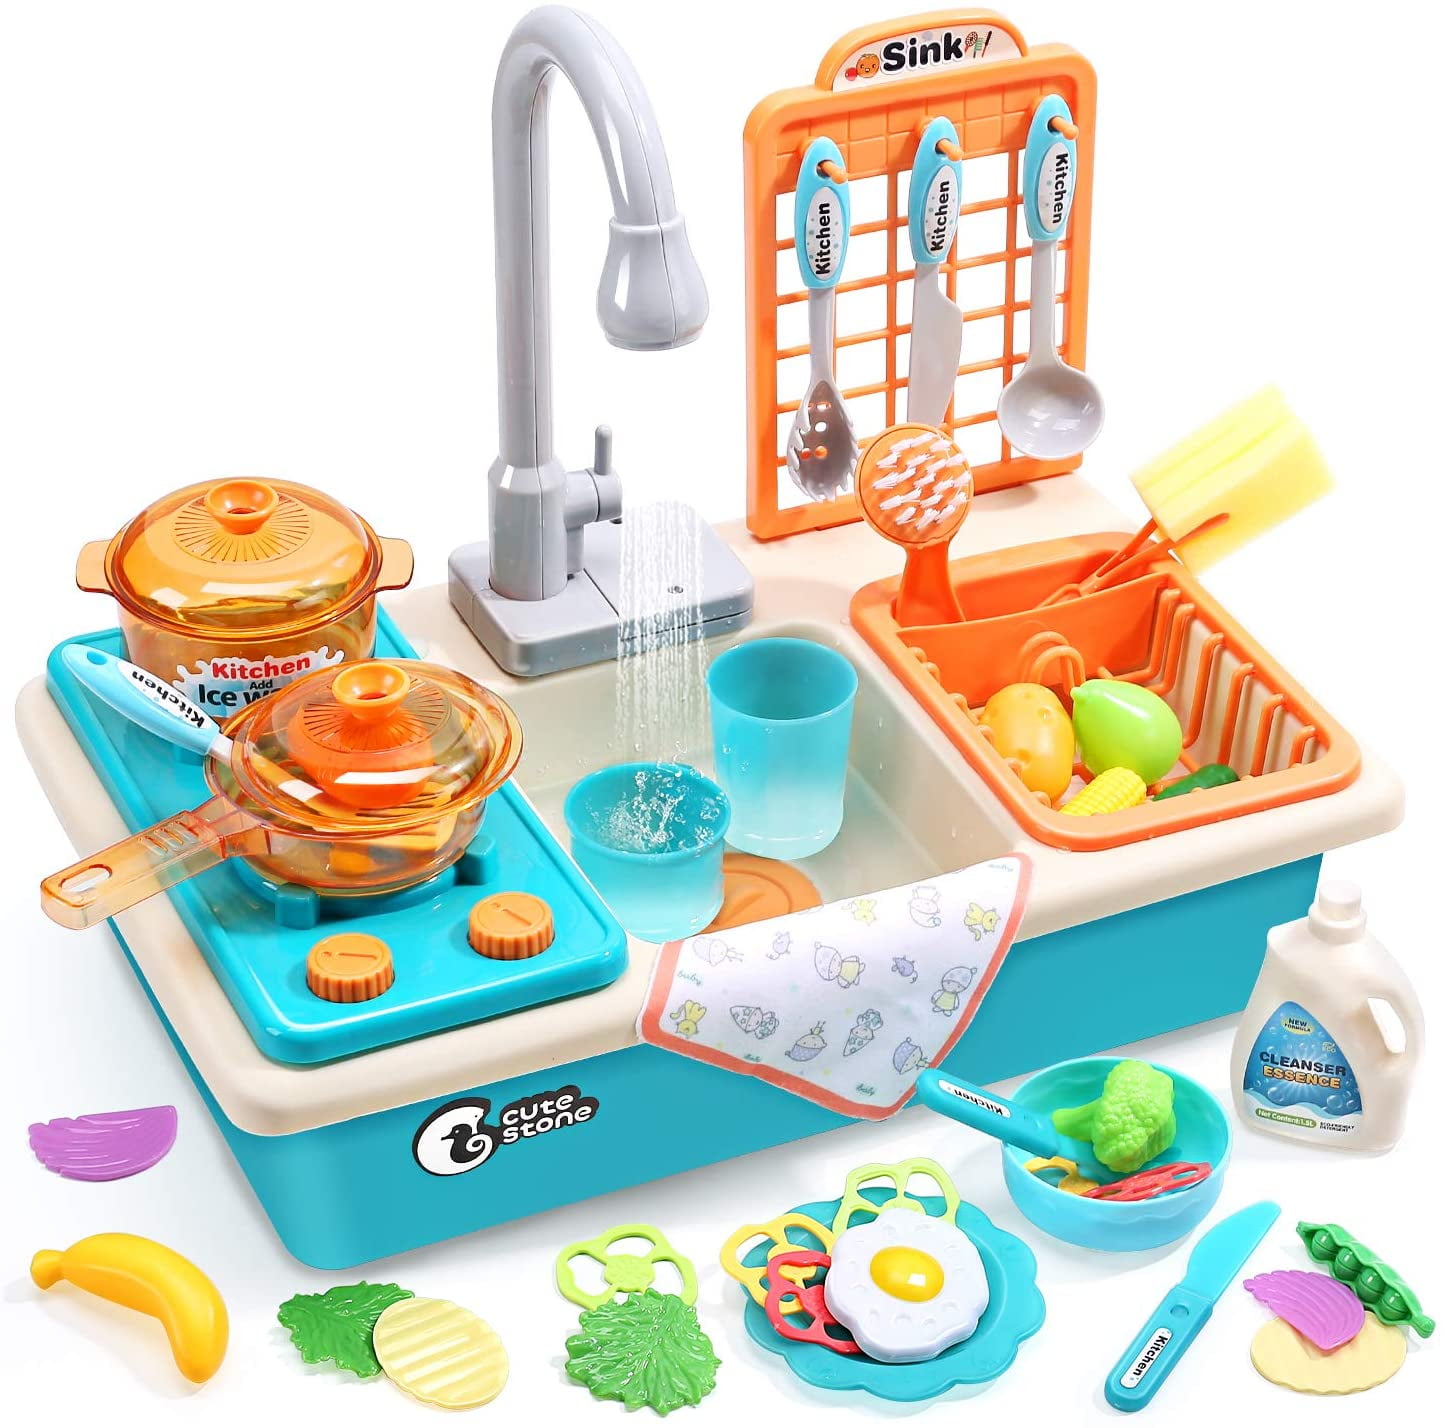 CUTE STONE Play Kitchen Sink Toys with Upgraded Real Faucet, Play Cooking Stove, Cookware Pot